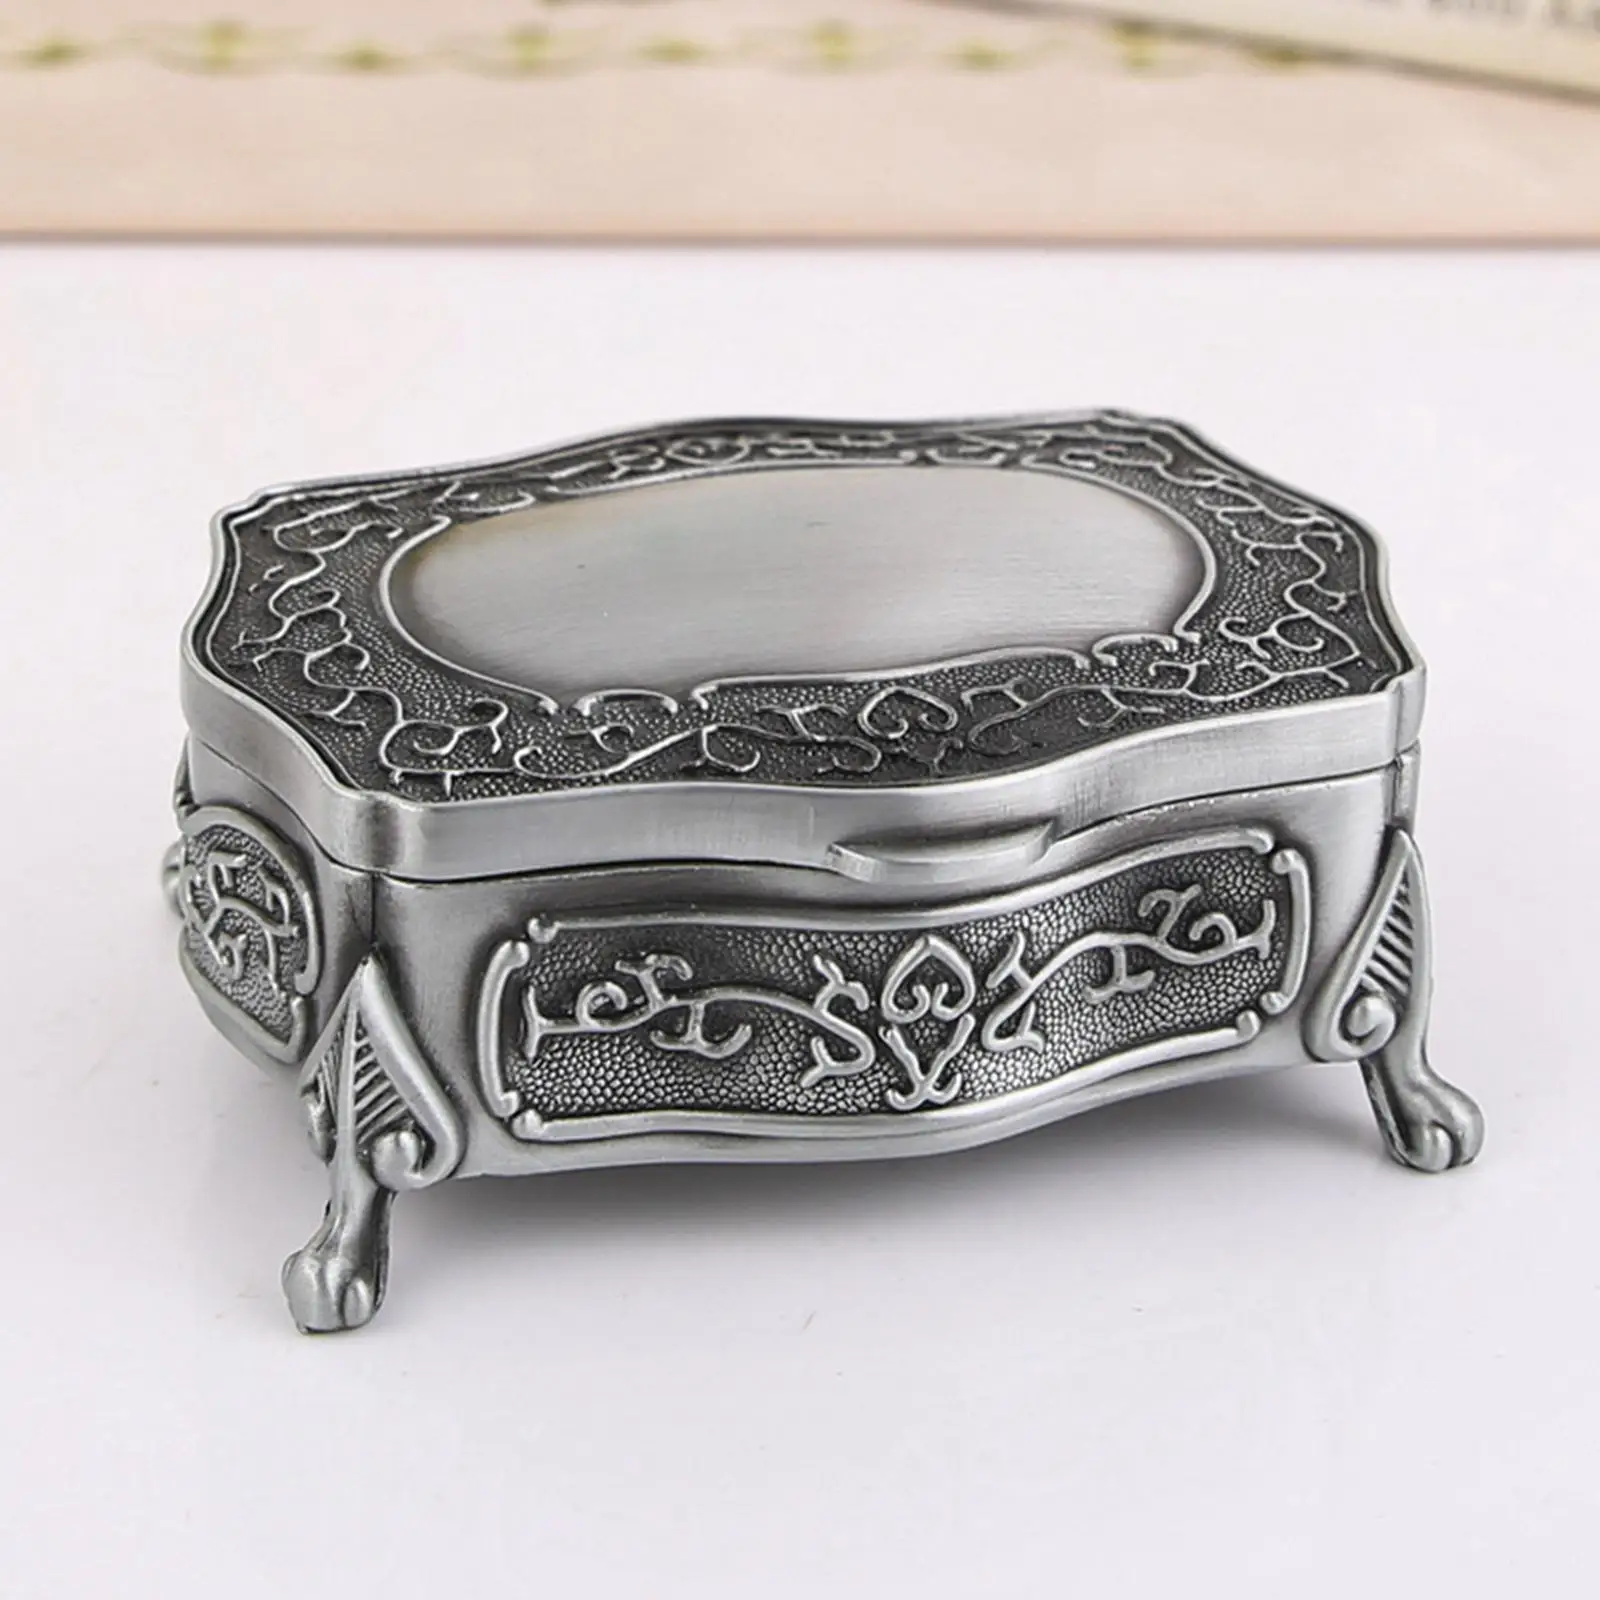 Jewelry Box Ring Box Holder Women Multifunctional Mini Birthday Gift Jewelry Organizer for Bracelet Earring Charm Rings Necklace